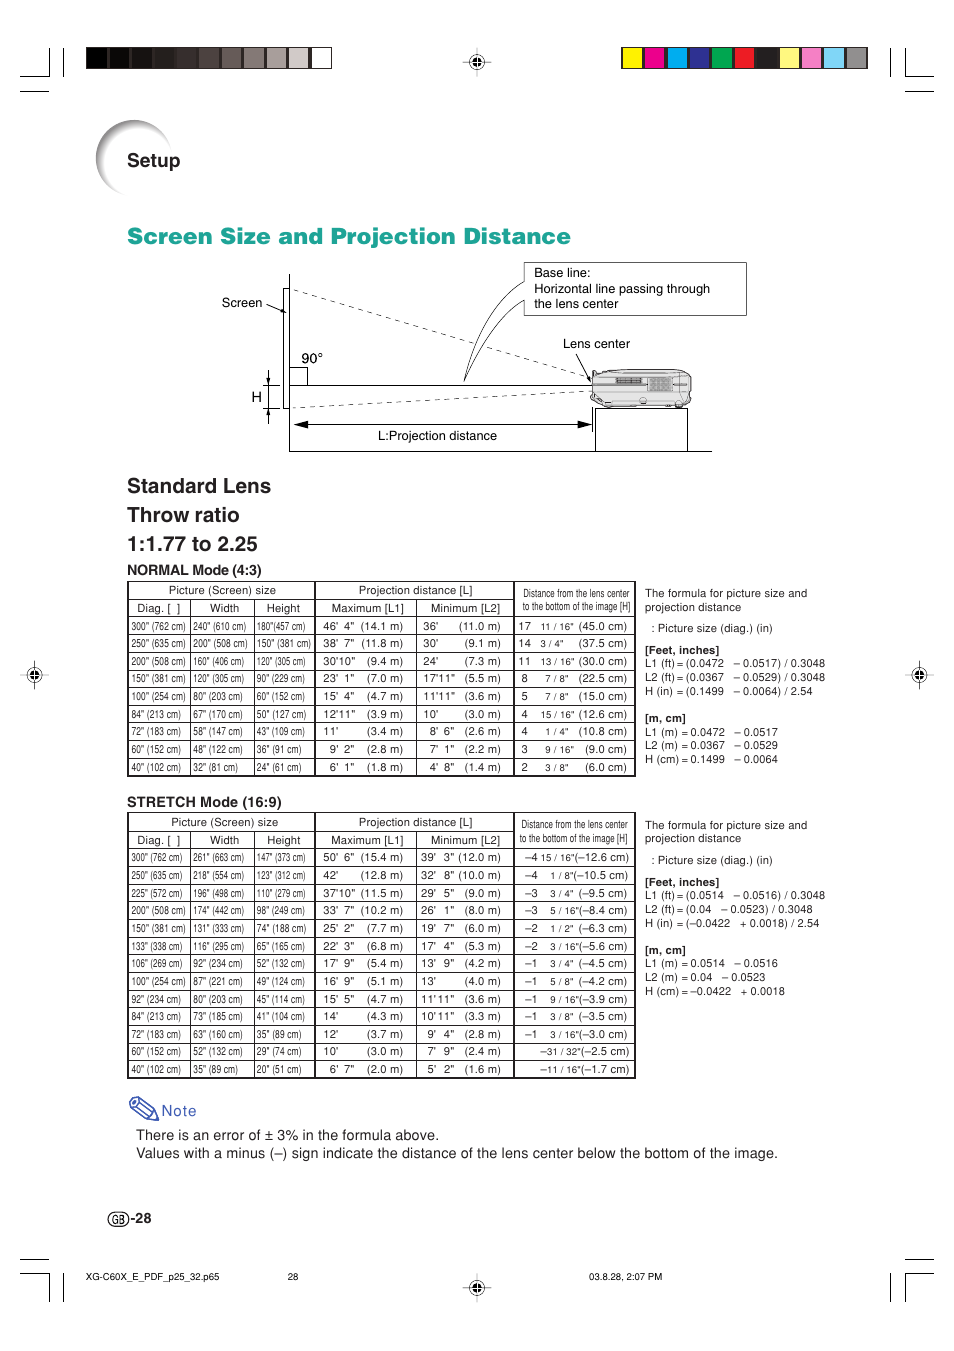 Screen size and projection distance, Setup | Sharp XG-C60X User Manual | Page 32 / 106